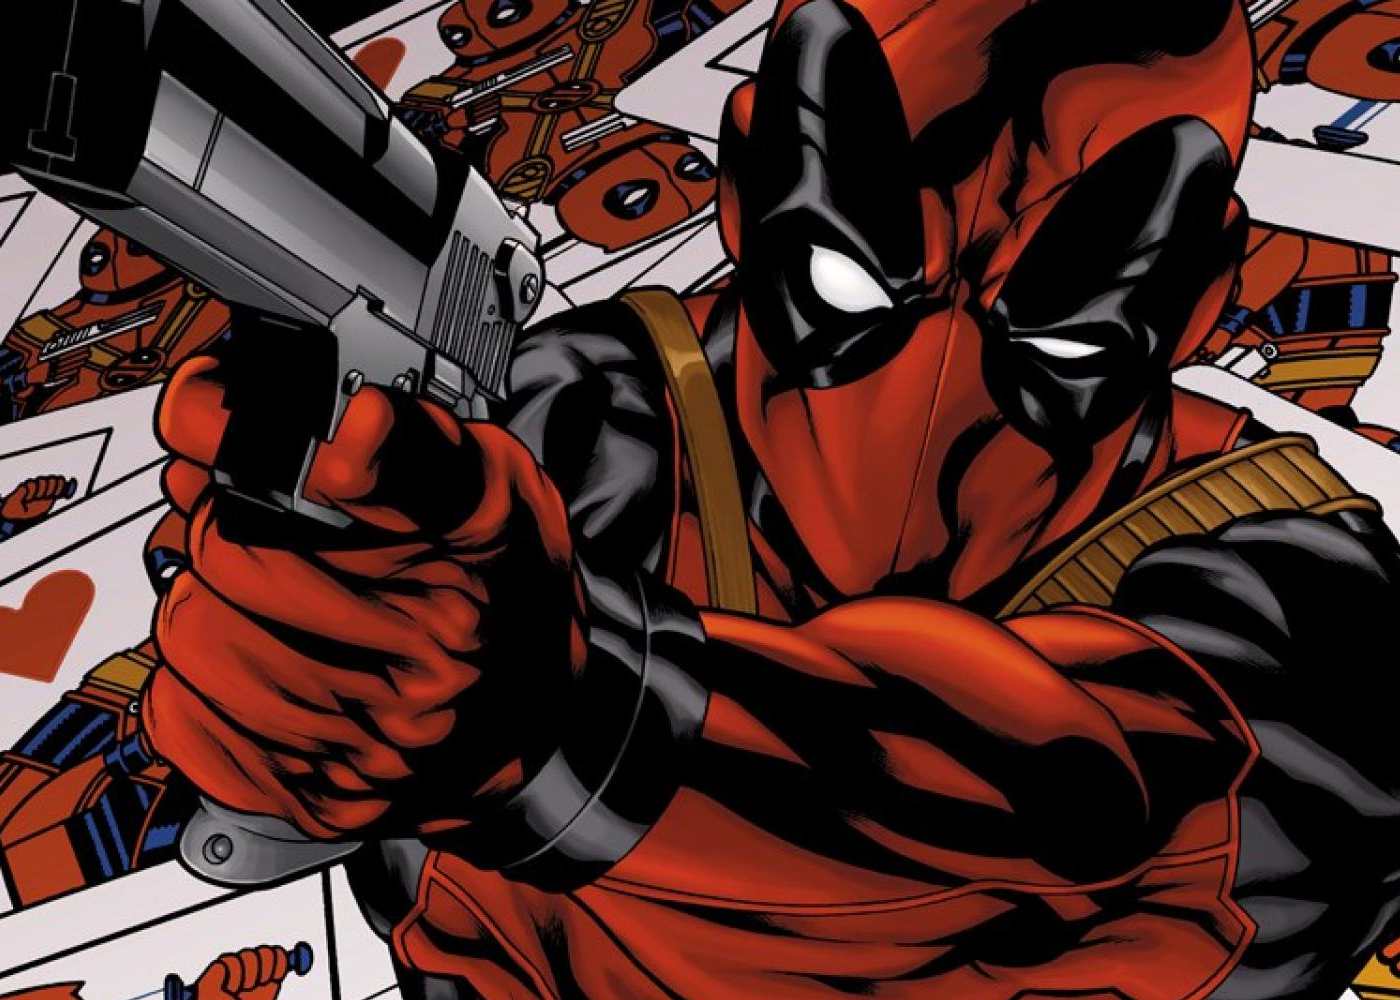 Donald Glover Developing Deadpool Animated Series for FXX